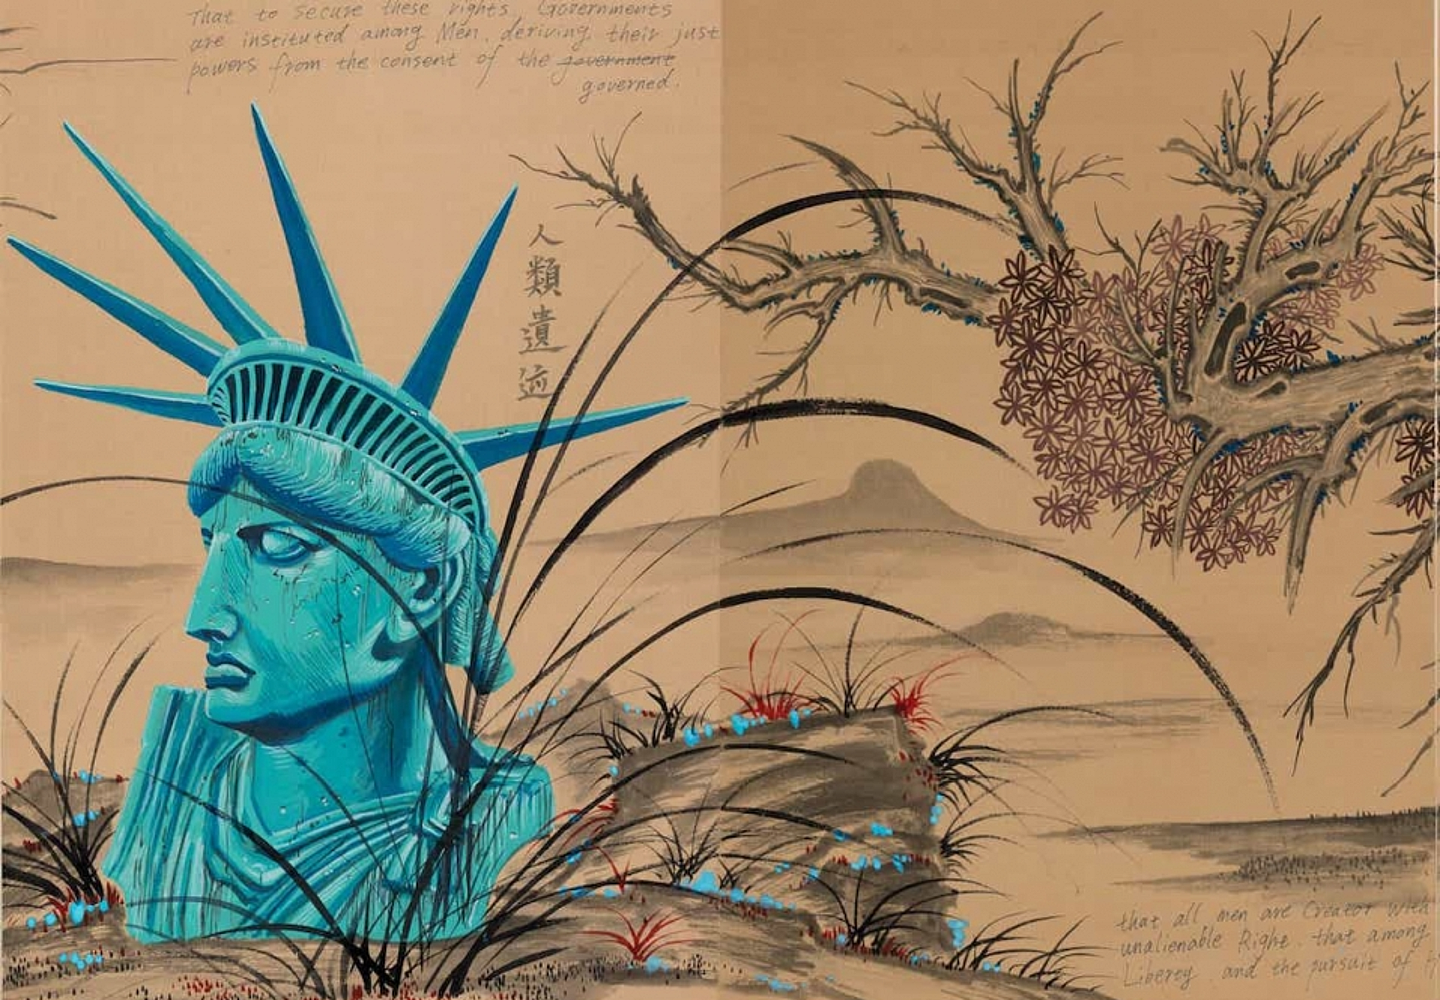 We The People: Xu Bing and Sun Xun Respond to the Declaration of Independence